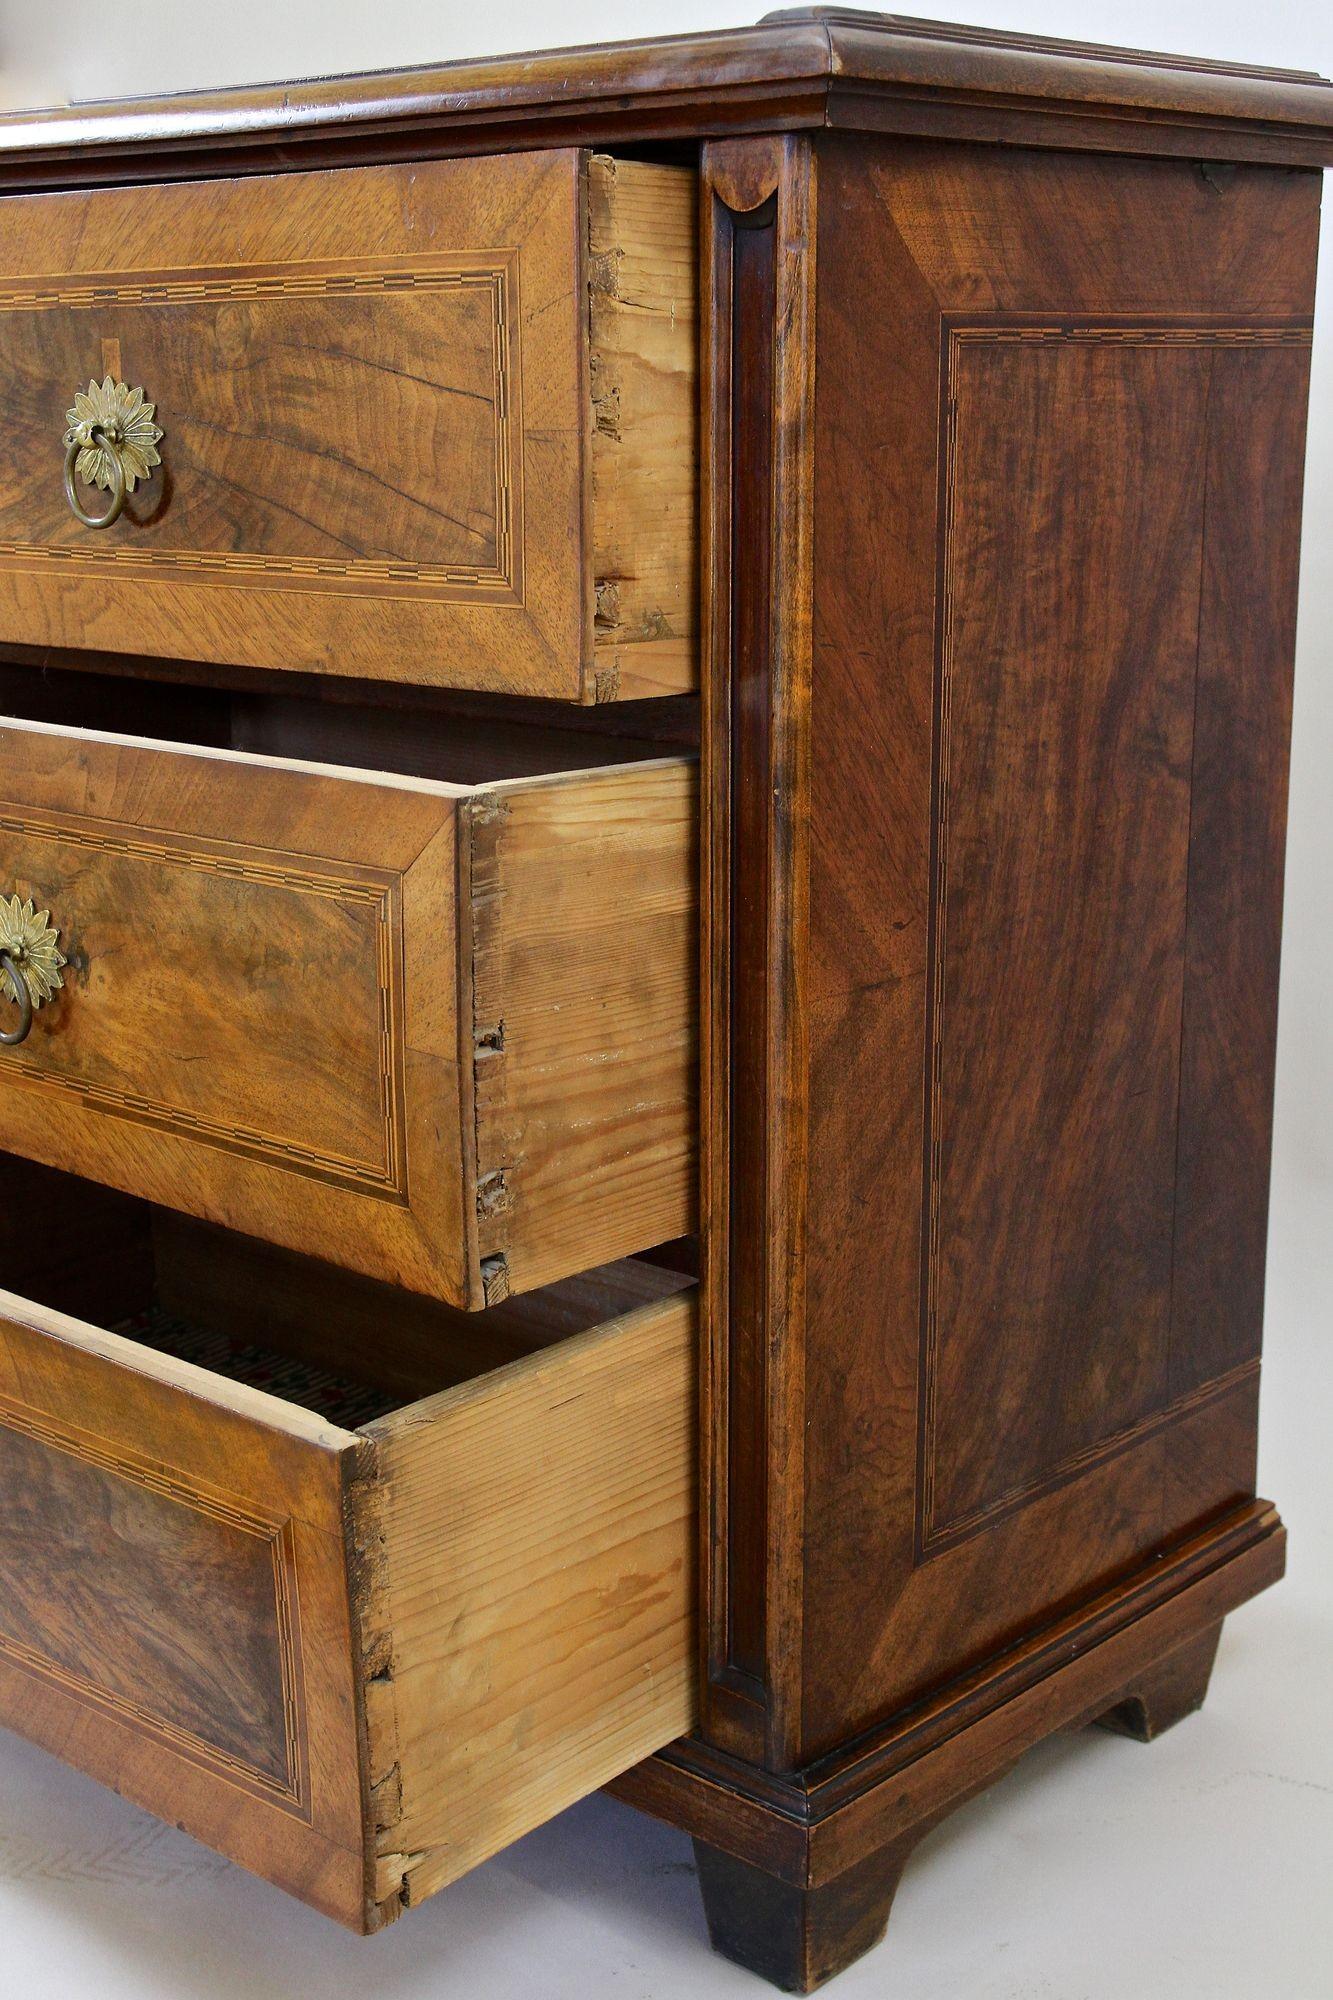 19th Century Biedermeier Nutwood Chest Of Drawers With Micro-Inlays, AT ca. 1850 For Sale 4